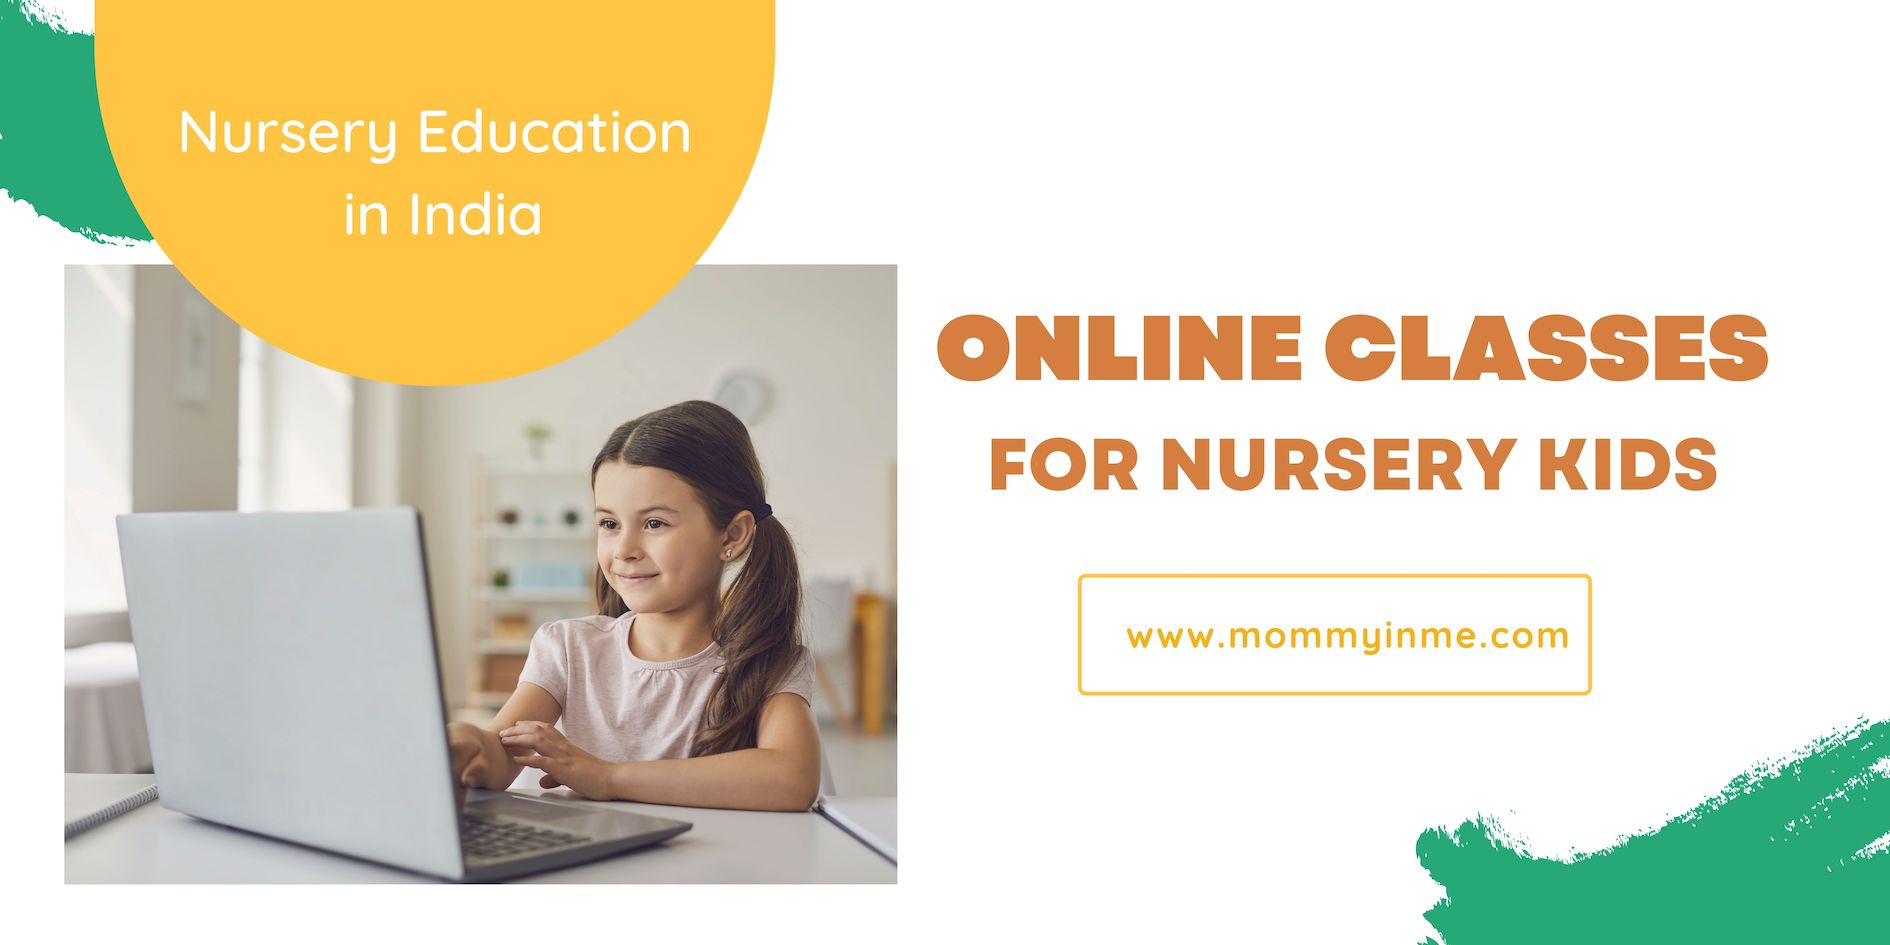 Online Classes for Nursery Kids – The Need of the Hour